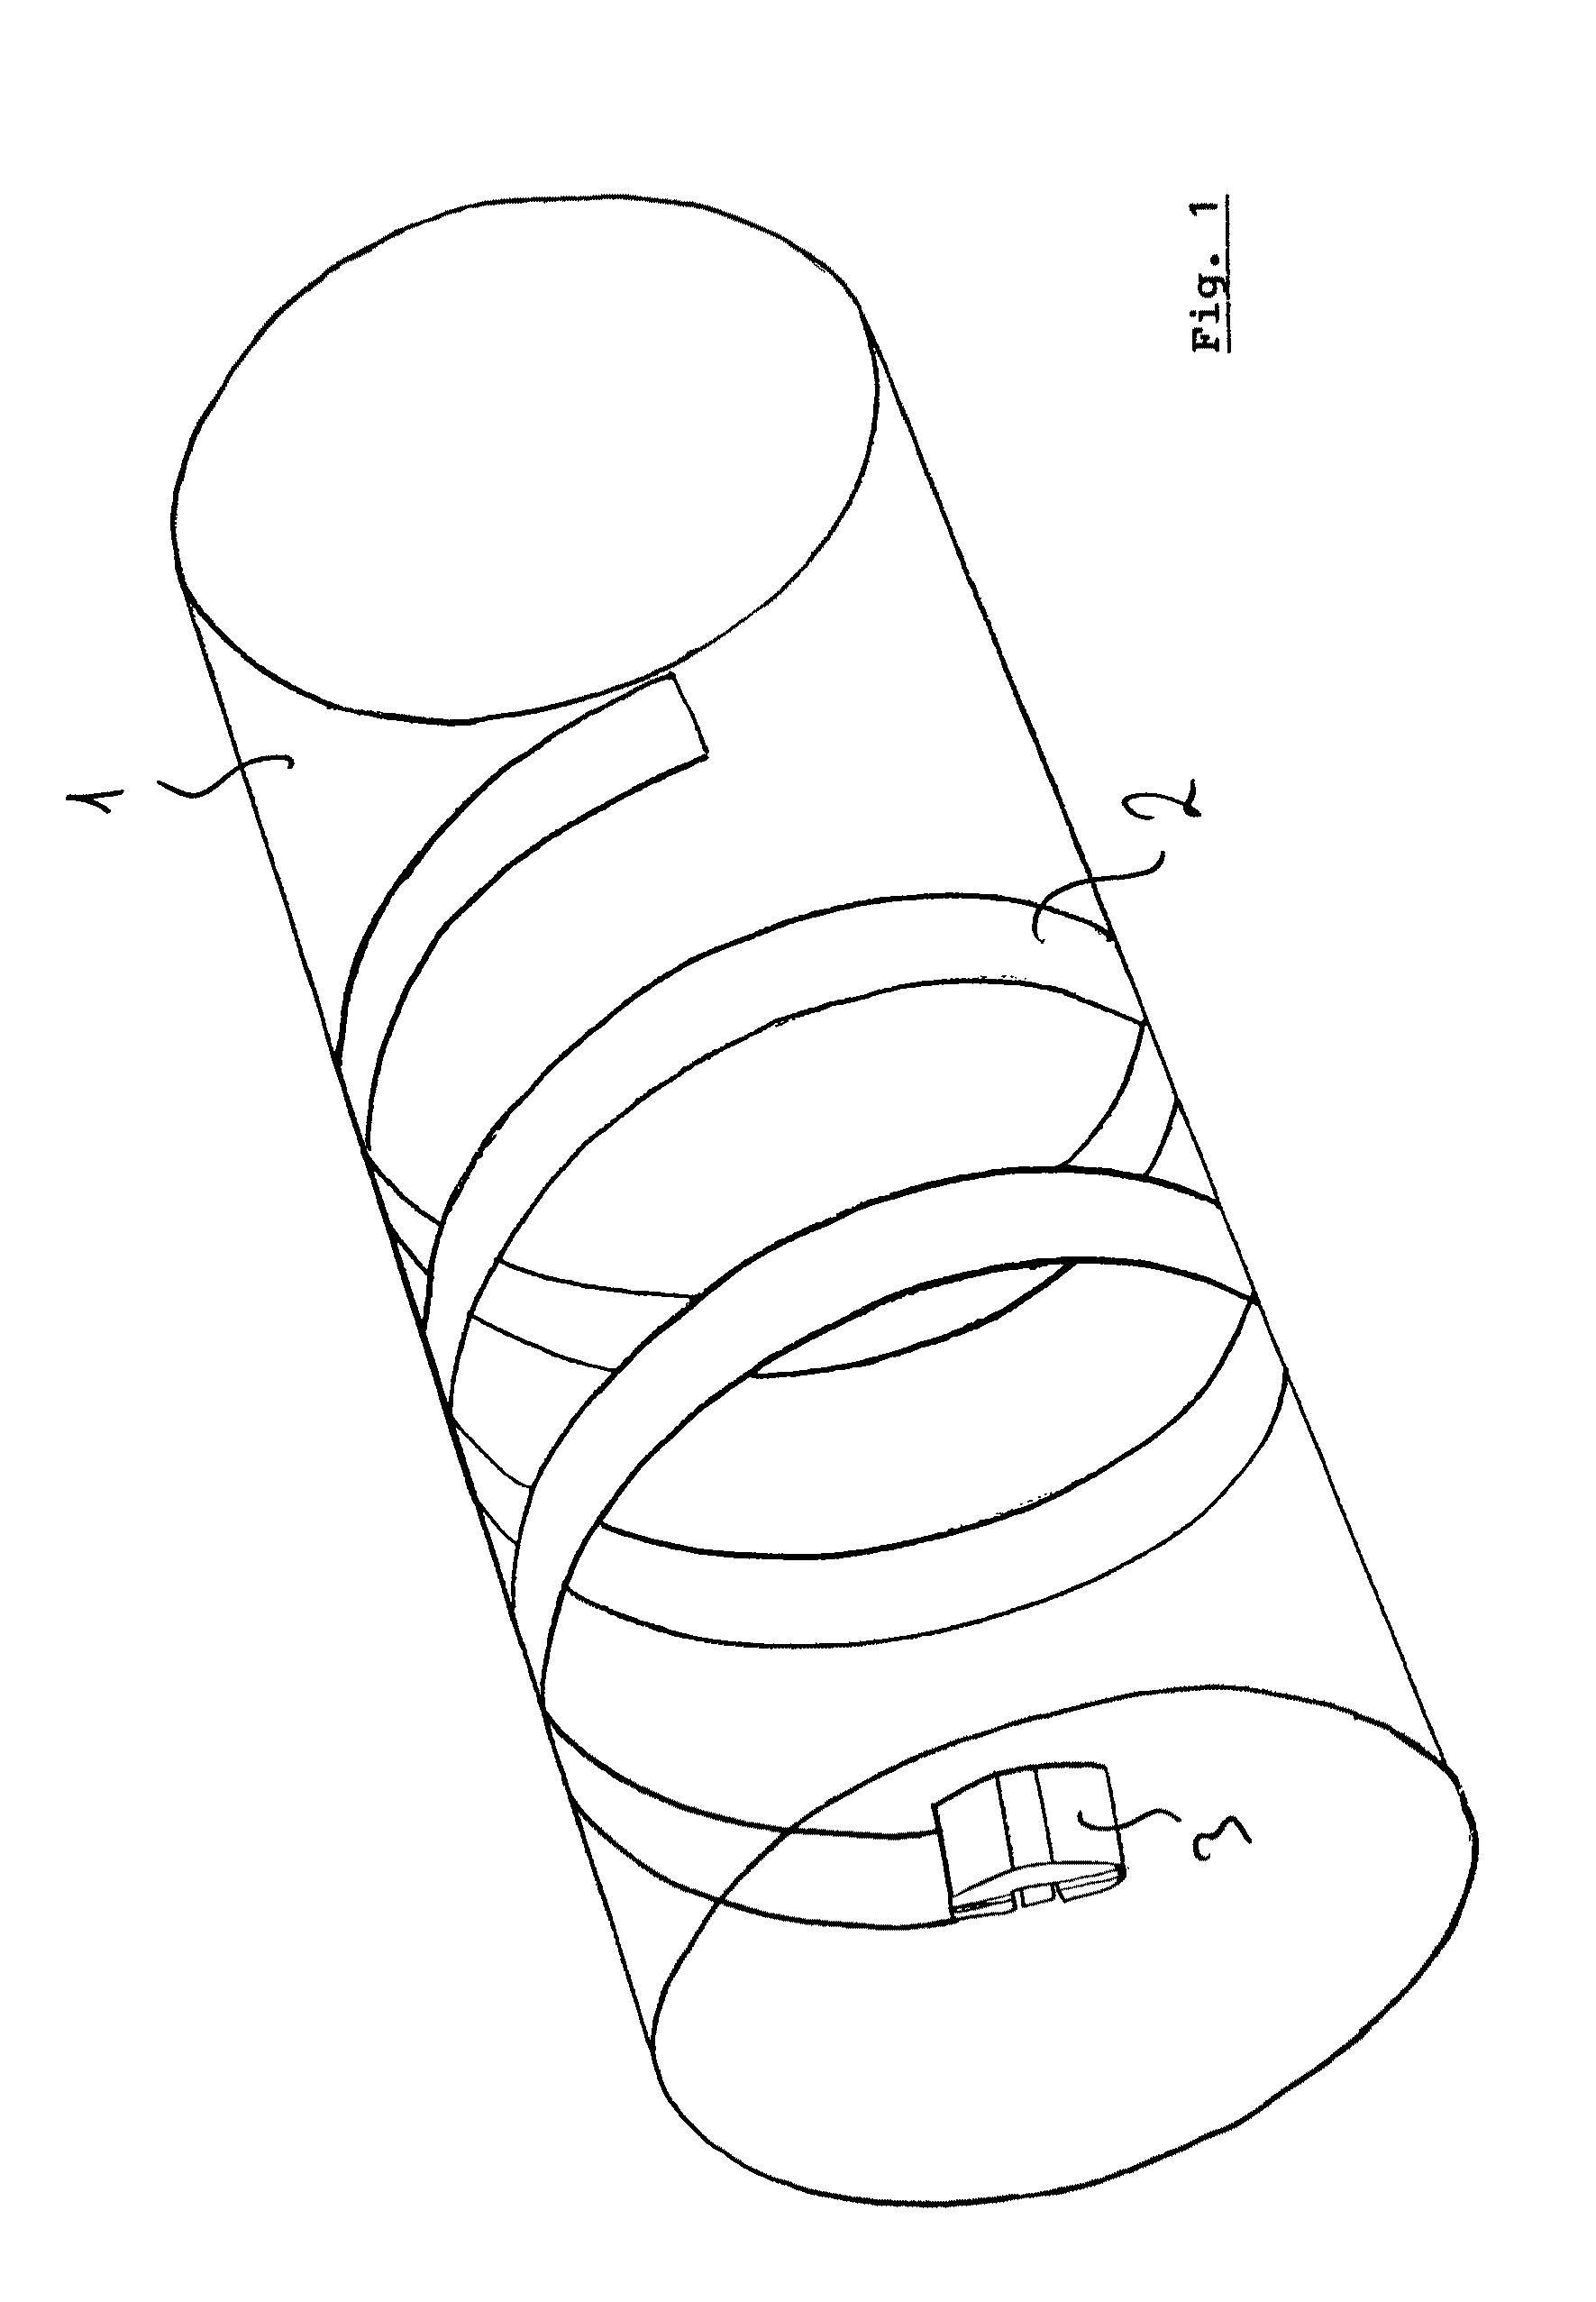 Device and method for nondestructive testing of pipelines